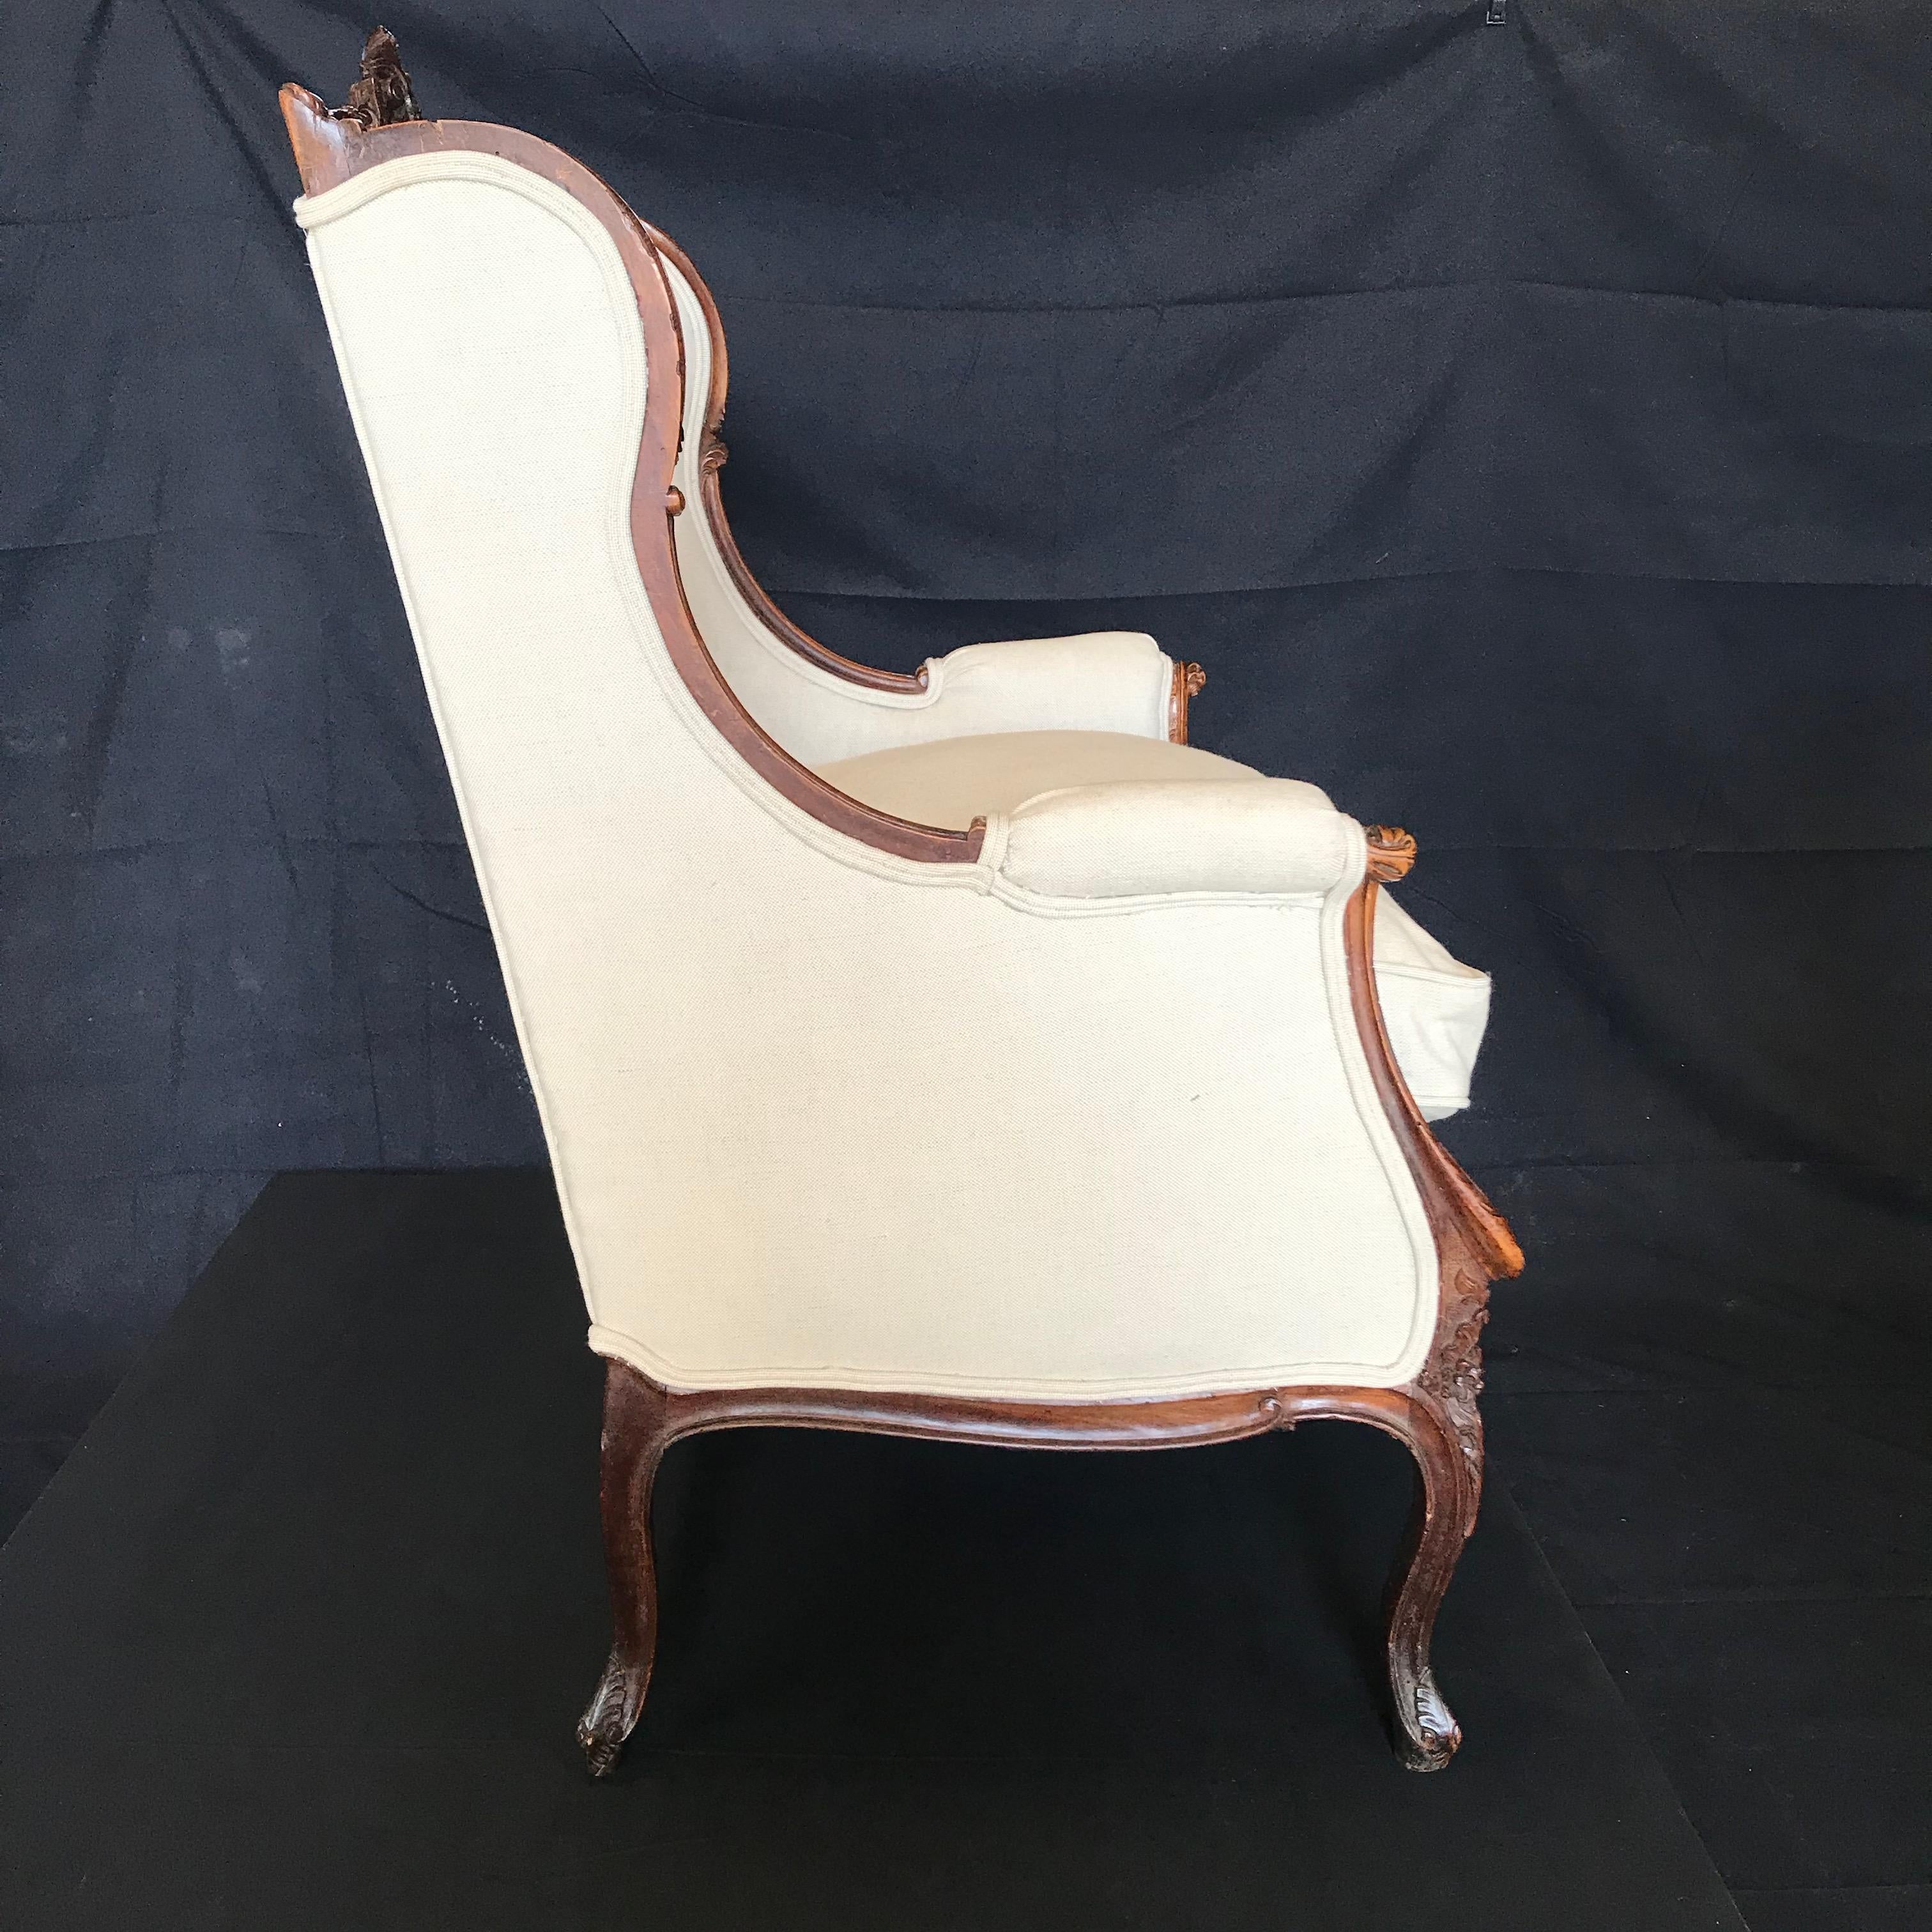 Classic and uber pretty mid-19th century French Louis XV carved armchair in dark walnut. Antique, yet super comfortable, this early armchair has an intricately carved back, arms legs and apron, with scrolled acanthus leaves amidst blossoming